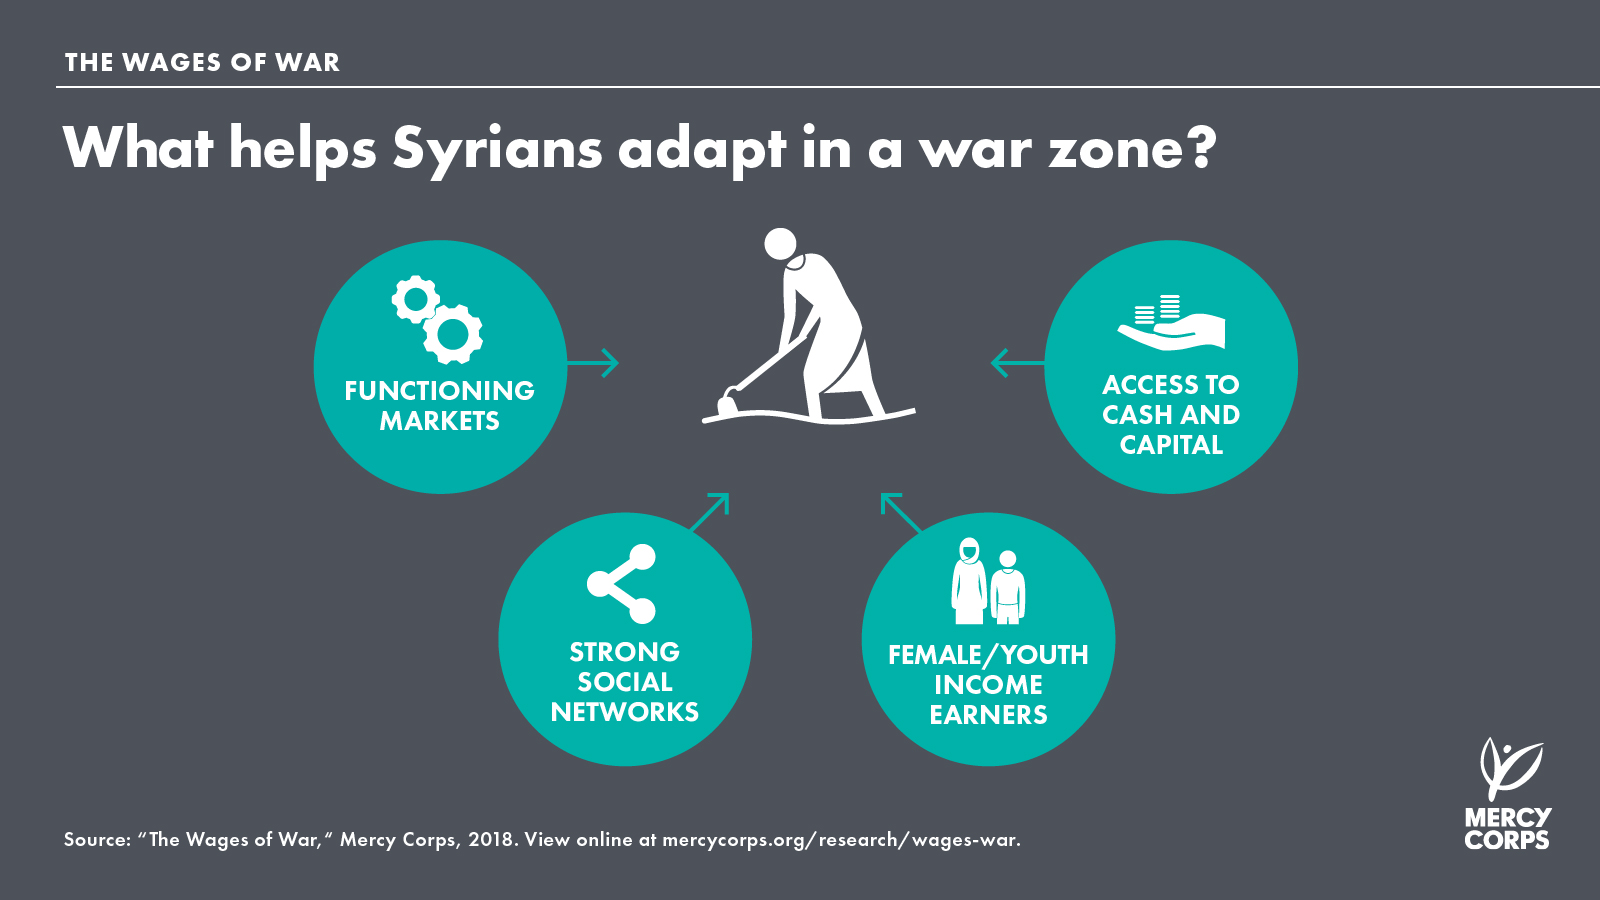 Functioning markets, access to cash and capital, strong social networks, and female/youth income earners help Syrians to adapt in a war zone.